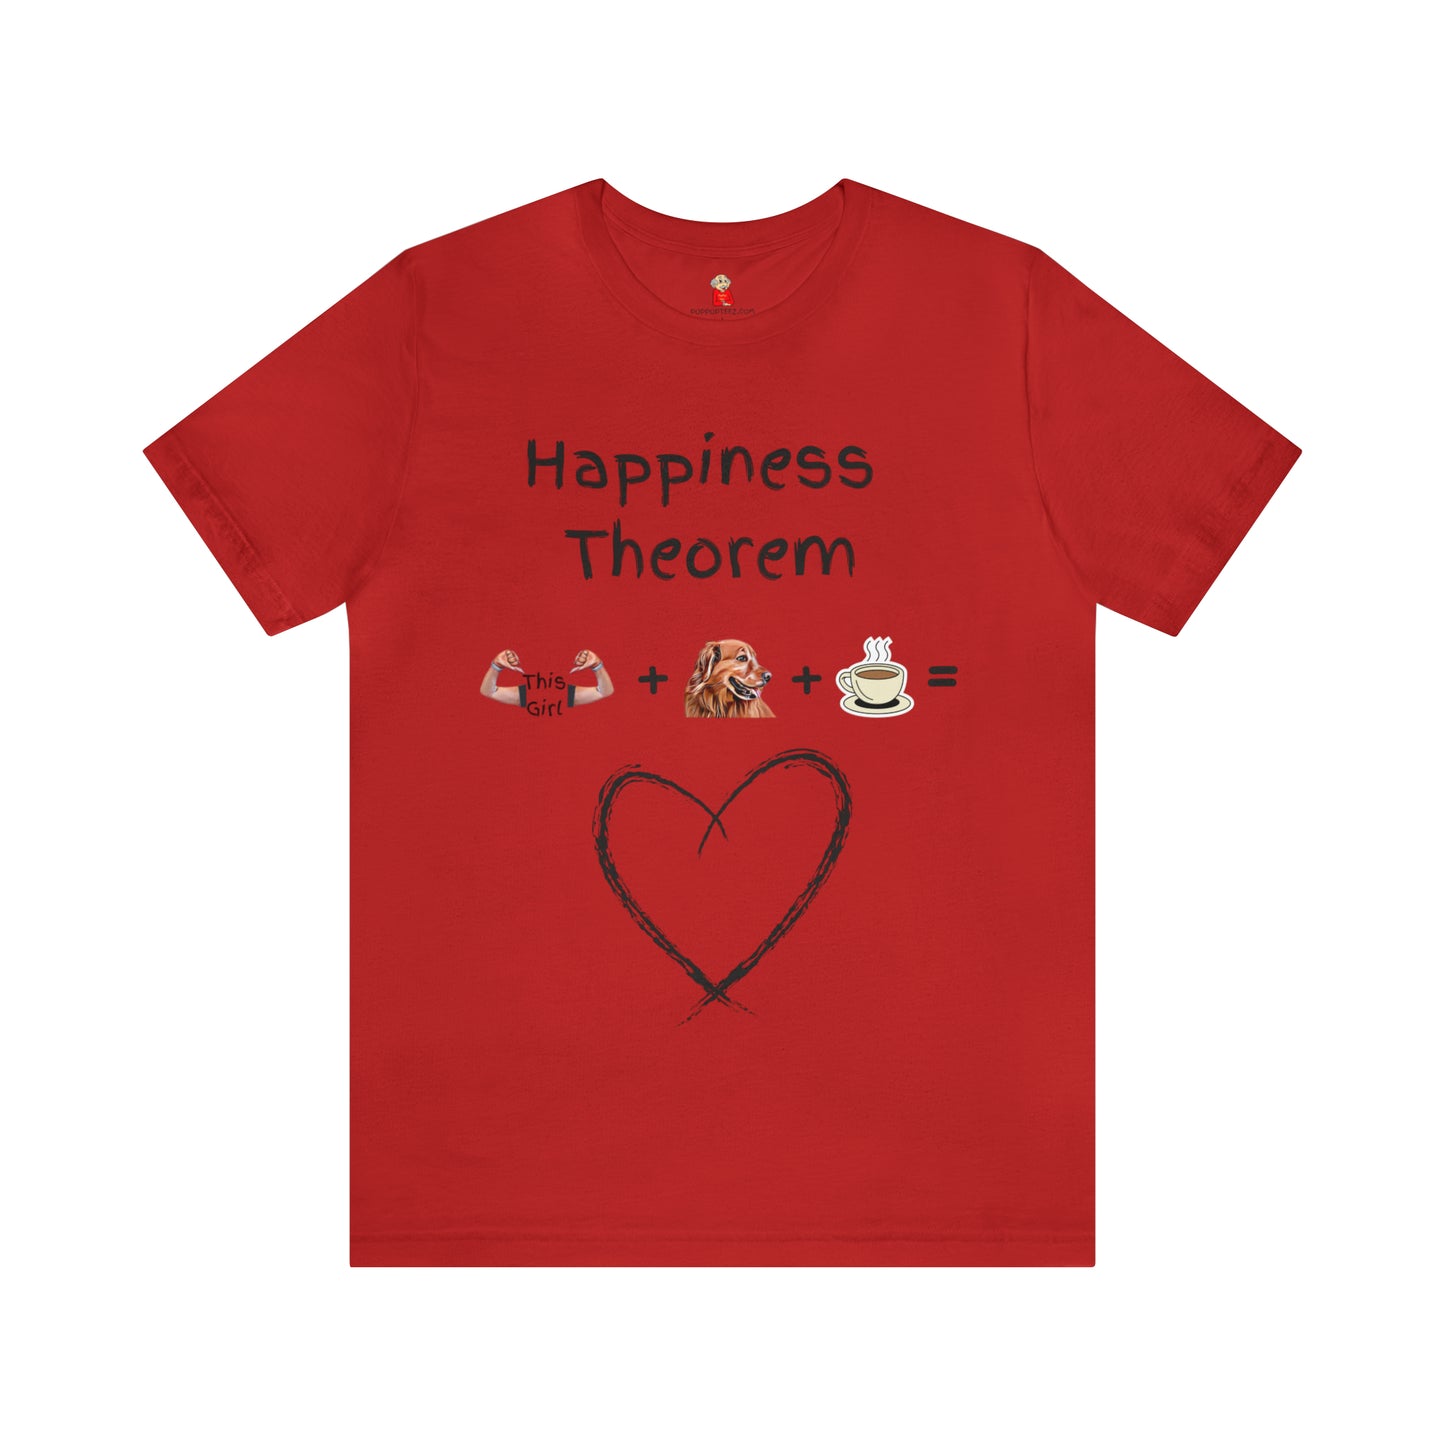 This Girl + Golden + Coffee = Happiness Unisex Jersey Tee